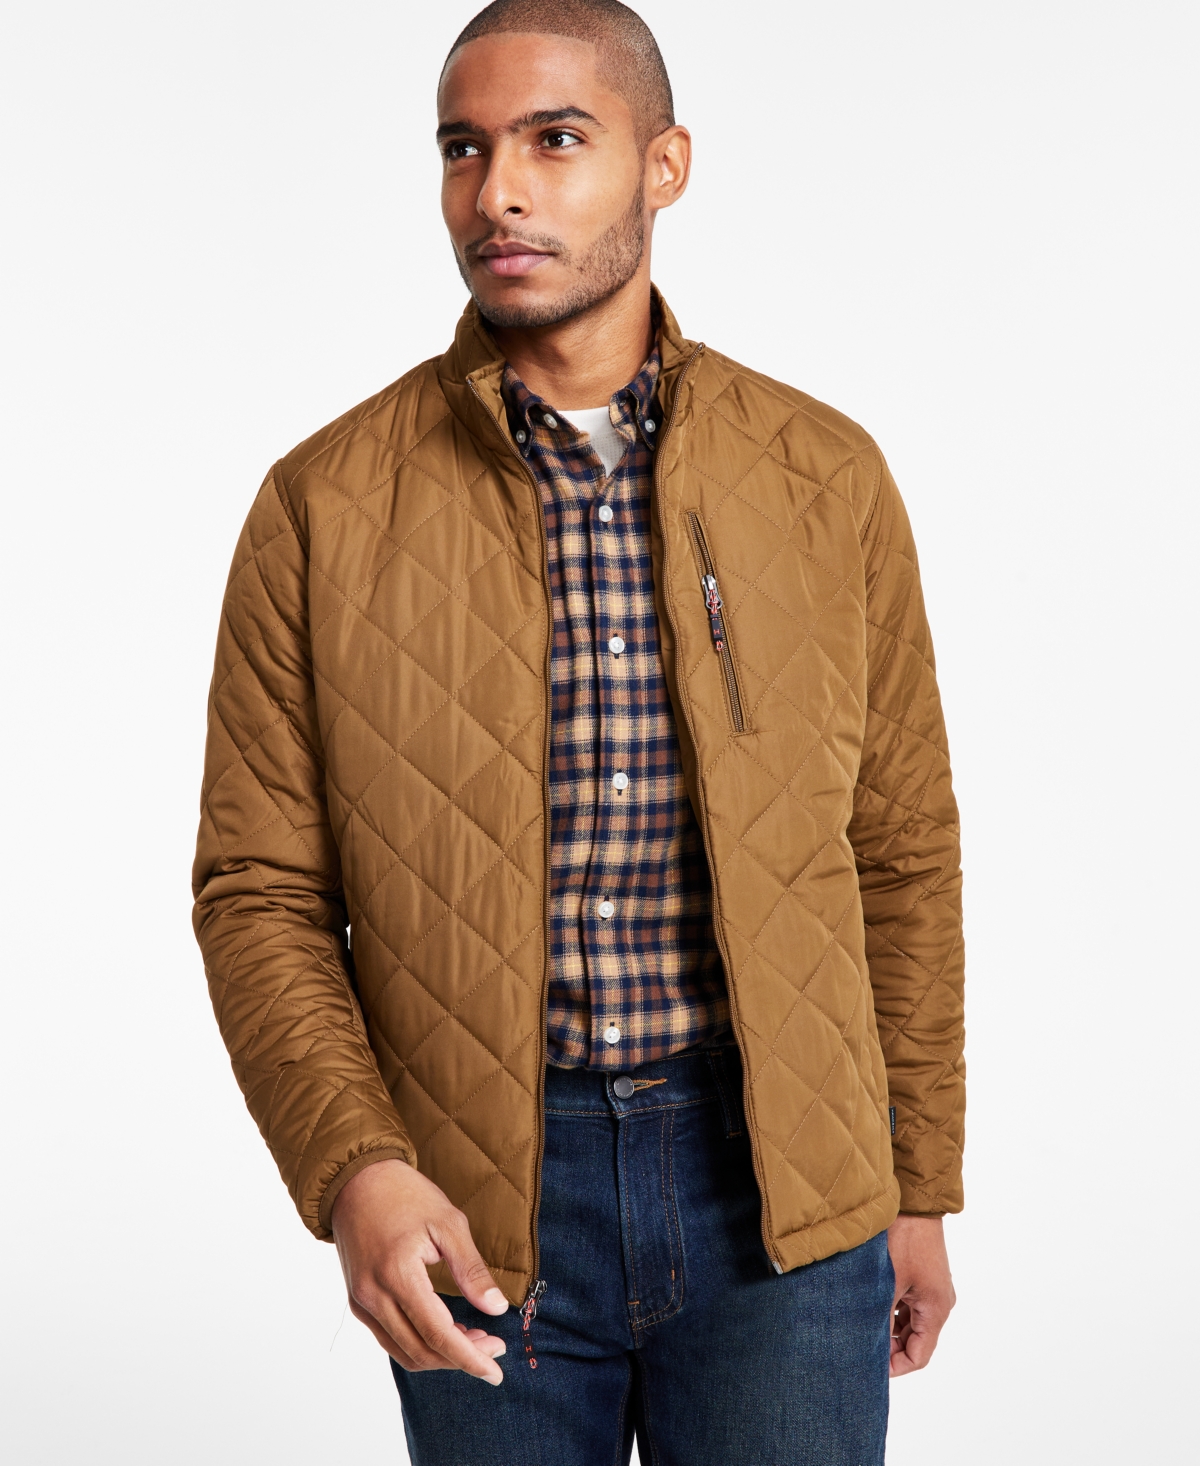 Hawke & Co. Men's Diamond Quilted Jacket $29.99, Outfitter Quilted Vest $19.99, More (Sizes S-2XL, Various Colors) + Free Shipping on $25+